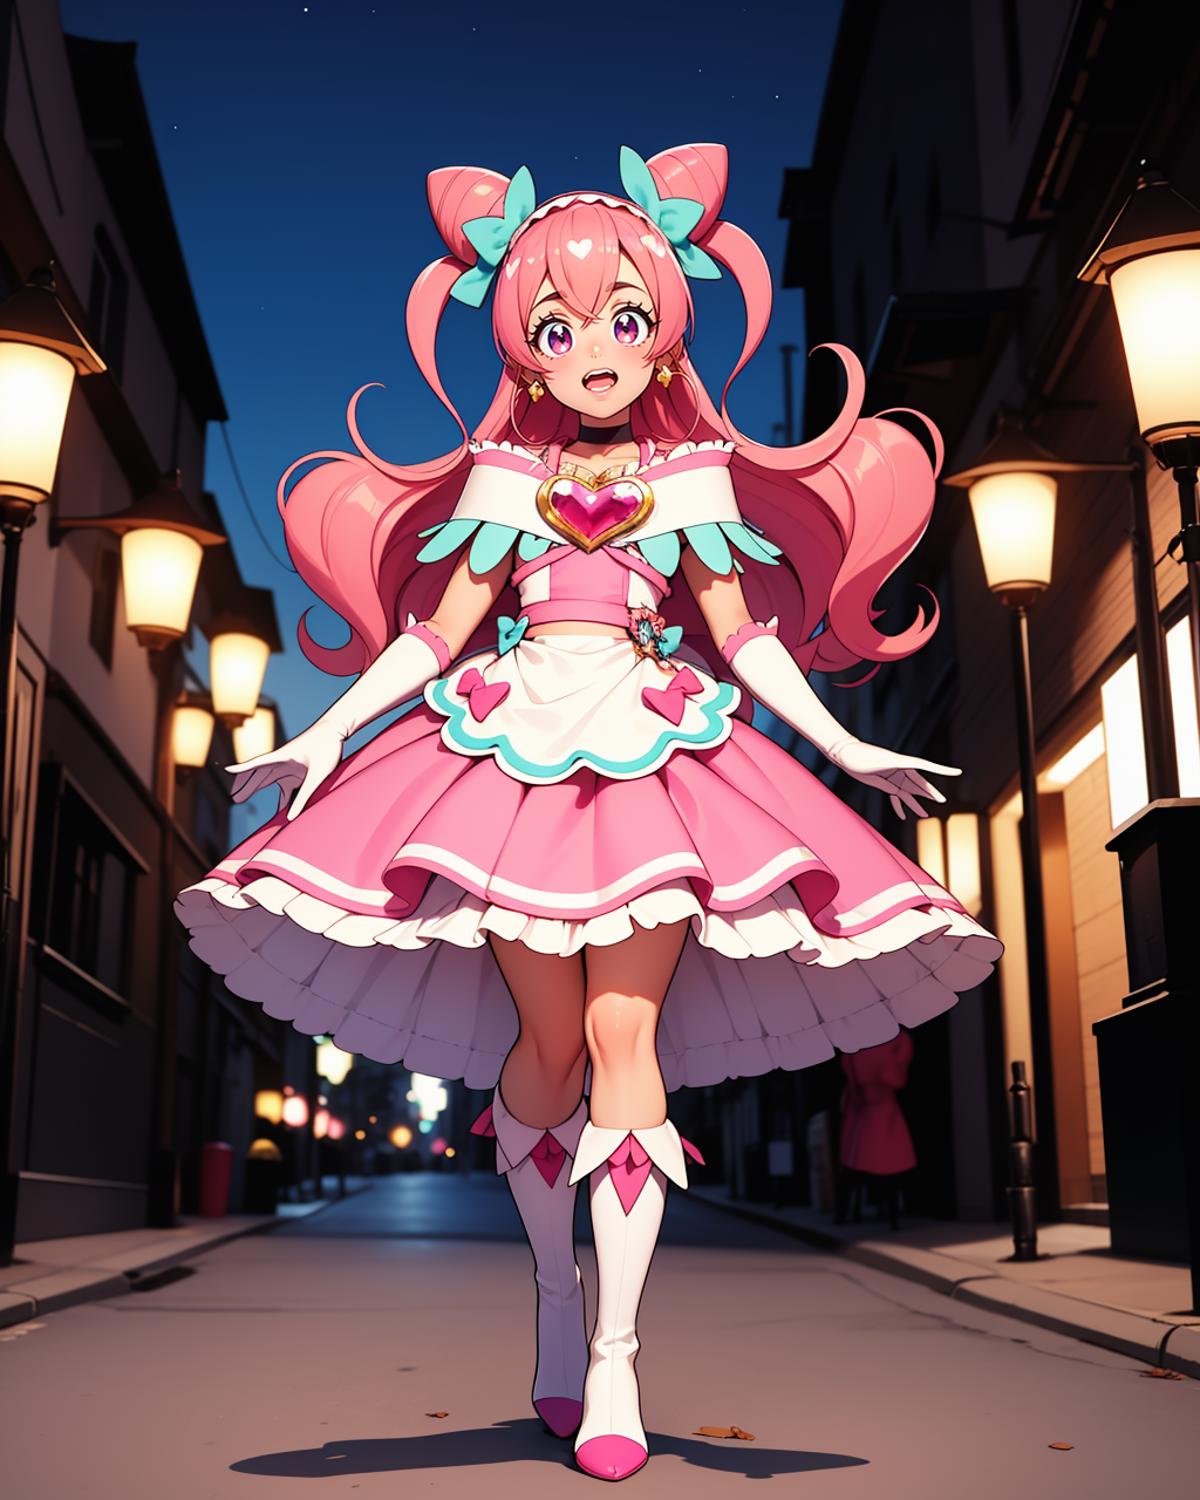 Cure Precious (Delicious Party♡Pretty Cure) デリシャスパーティ♡プリキュア キュアプレシャス image by Sophorium